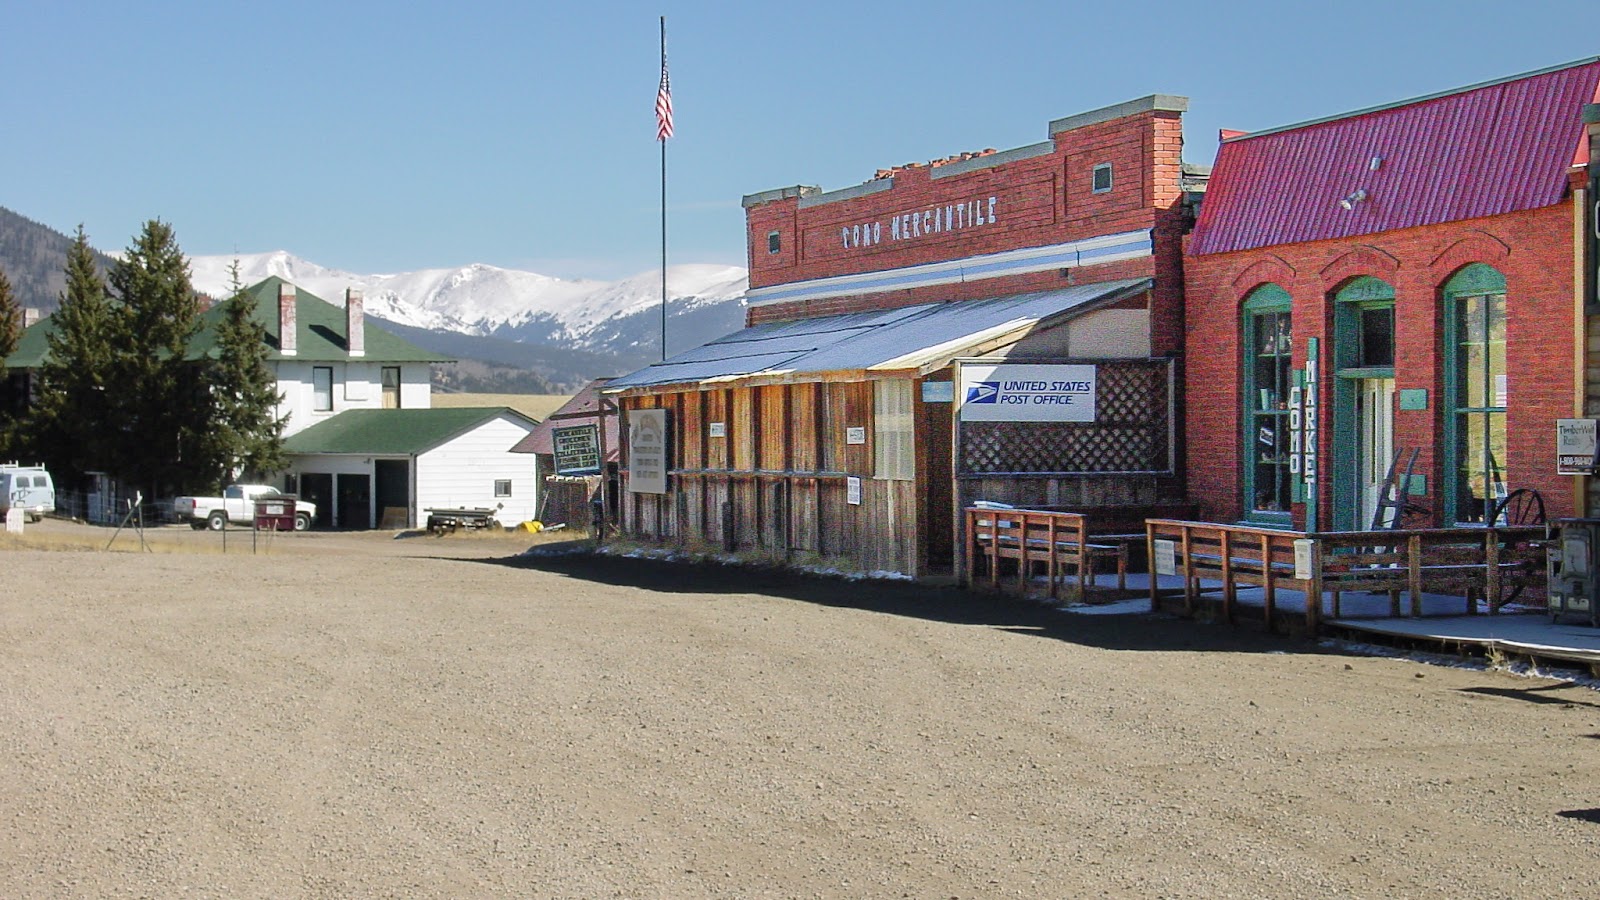 Small town store with dirt streets and snowy mountains.